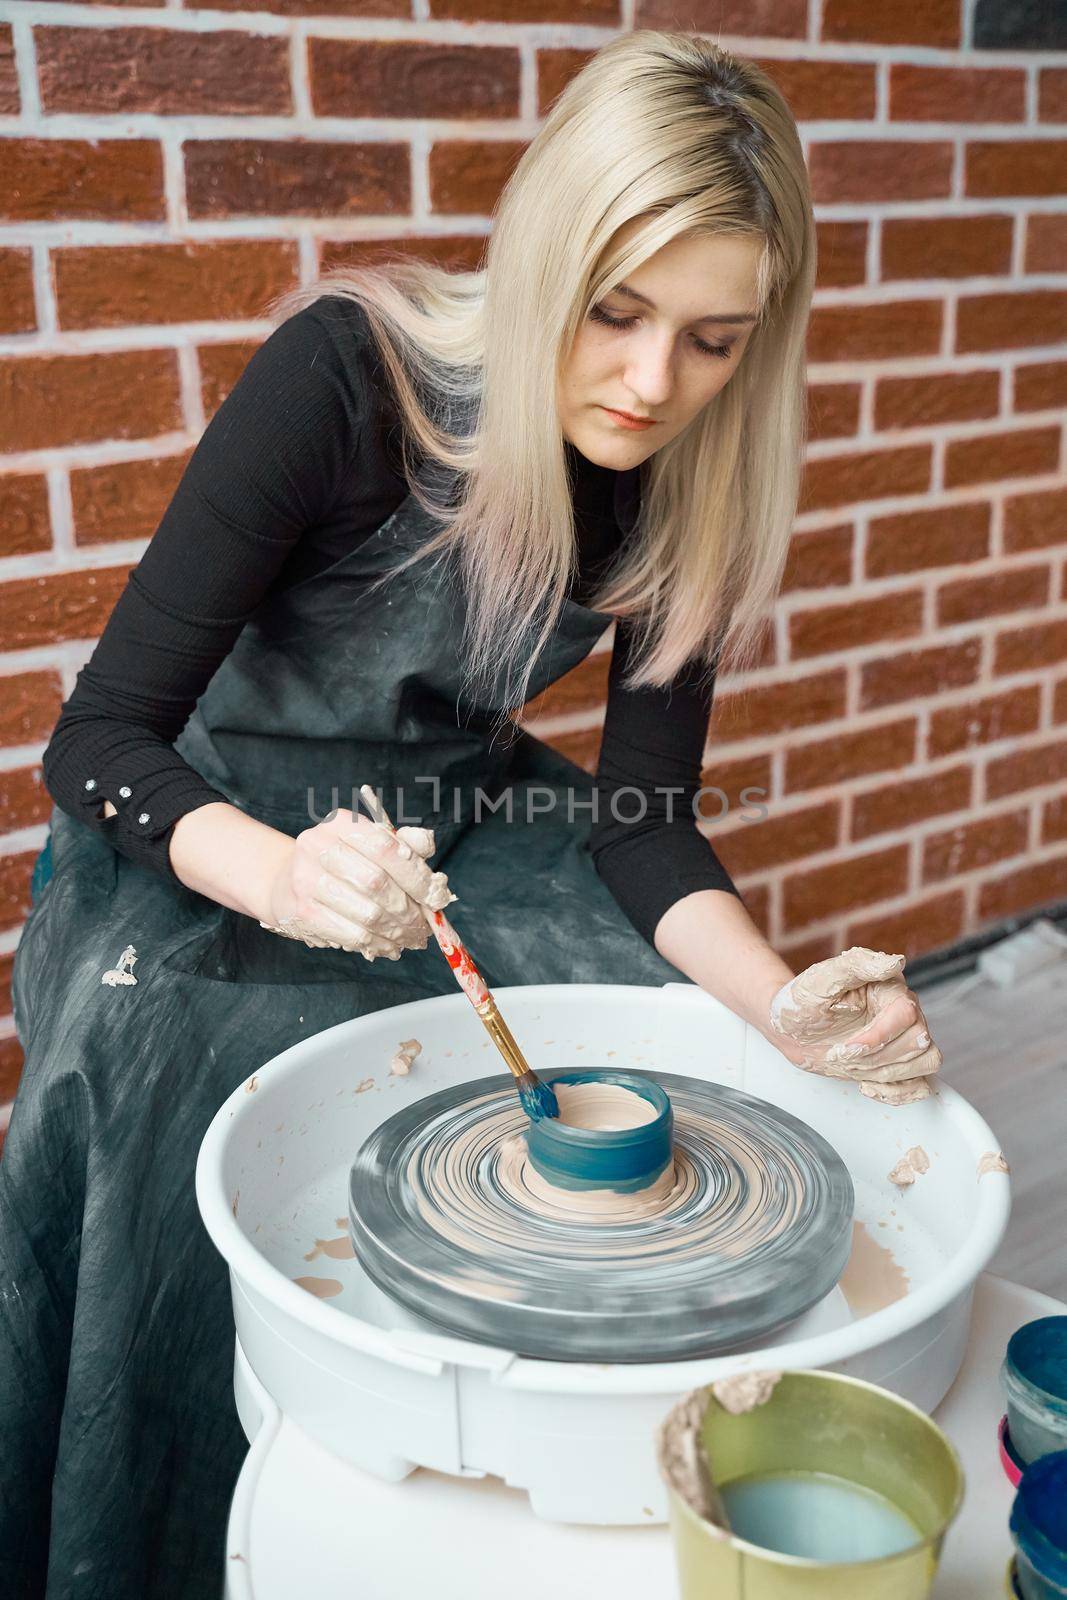 Happy woman making ceramic pottery on wheel, paints blue. Concept for woman in freelance, business. Handcraft product. Earn extra money, side hustle, turning hobbies into cash and passion into a job